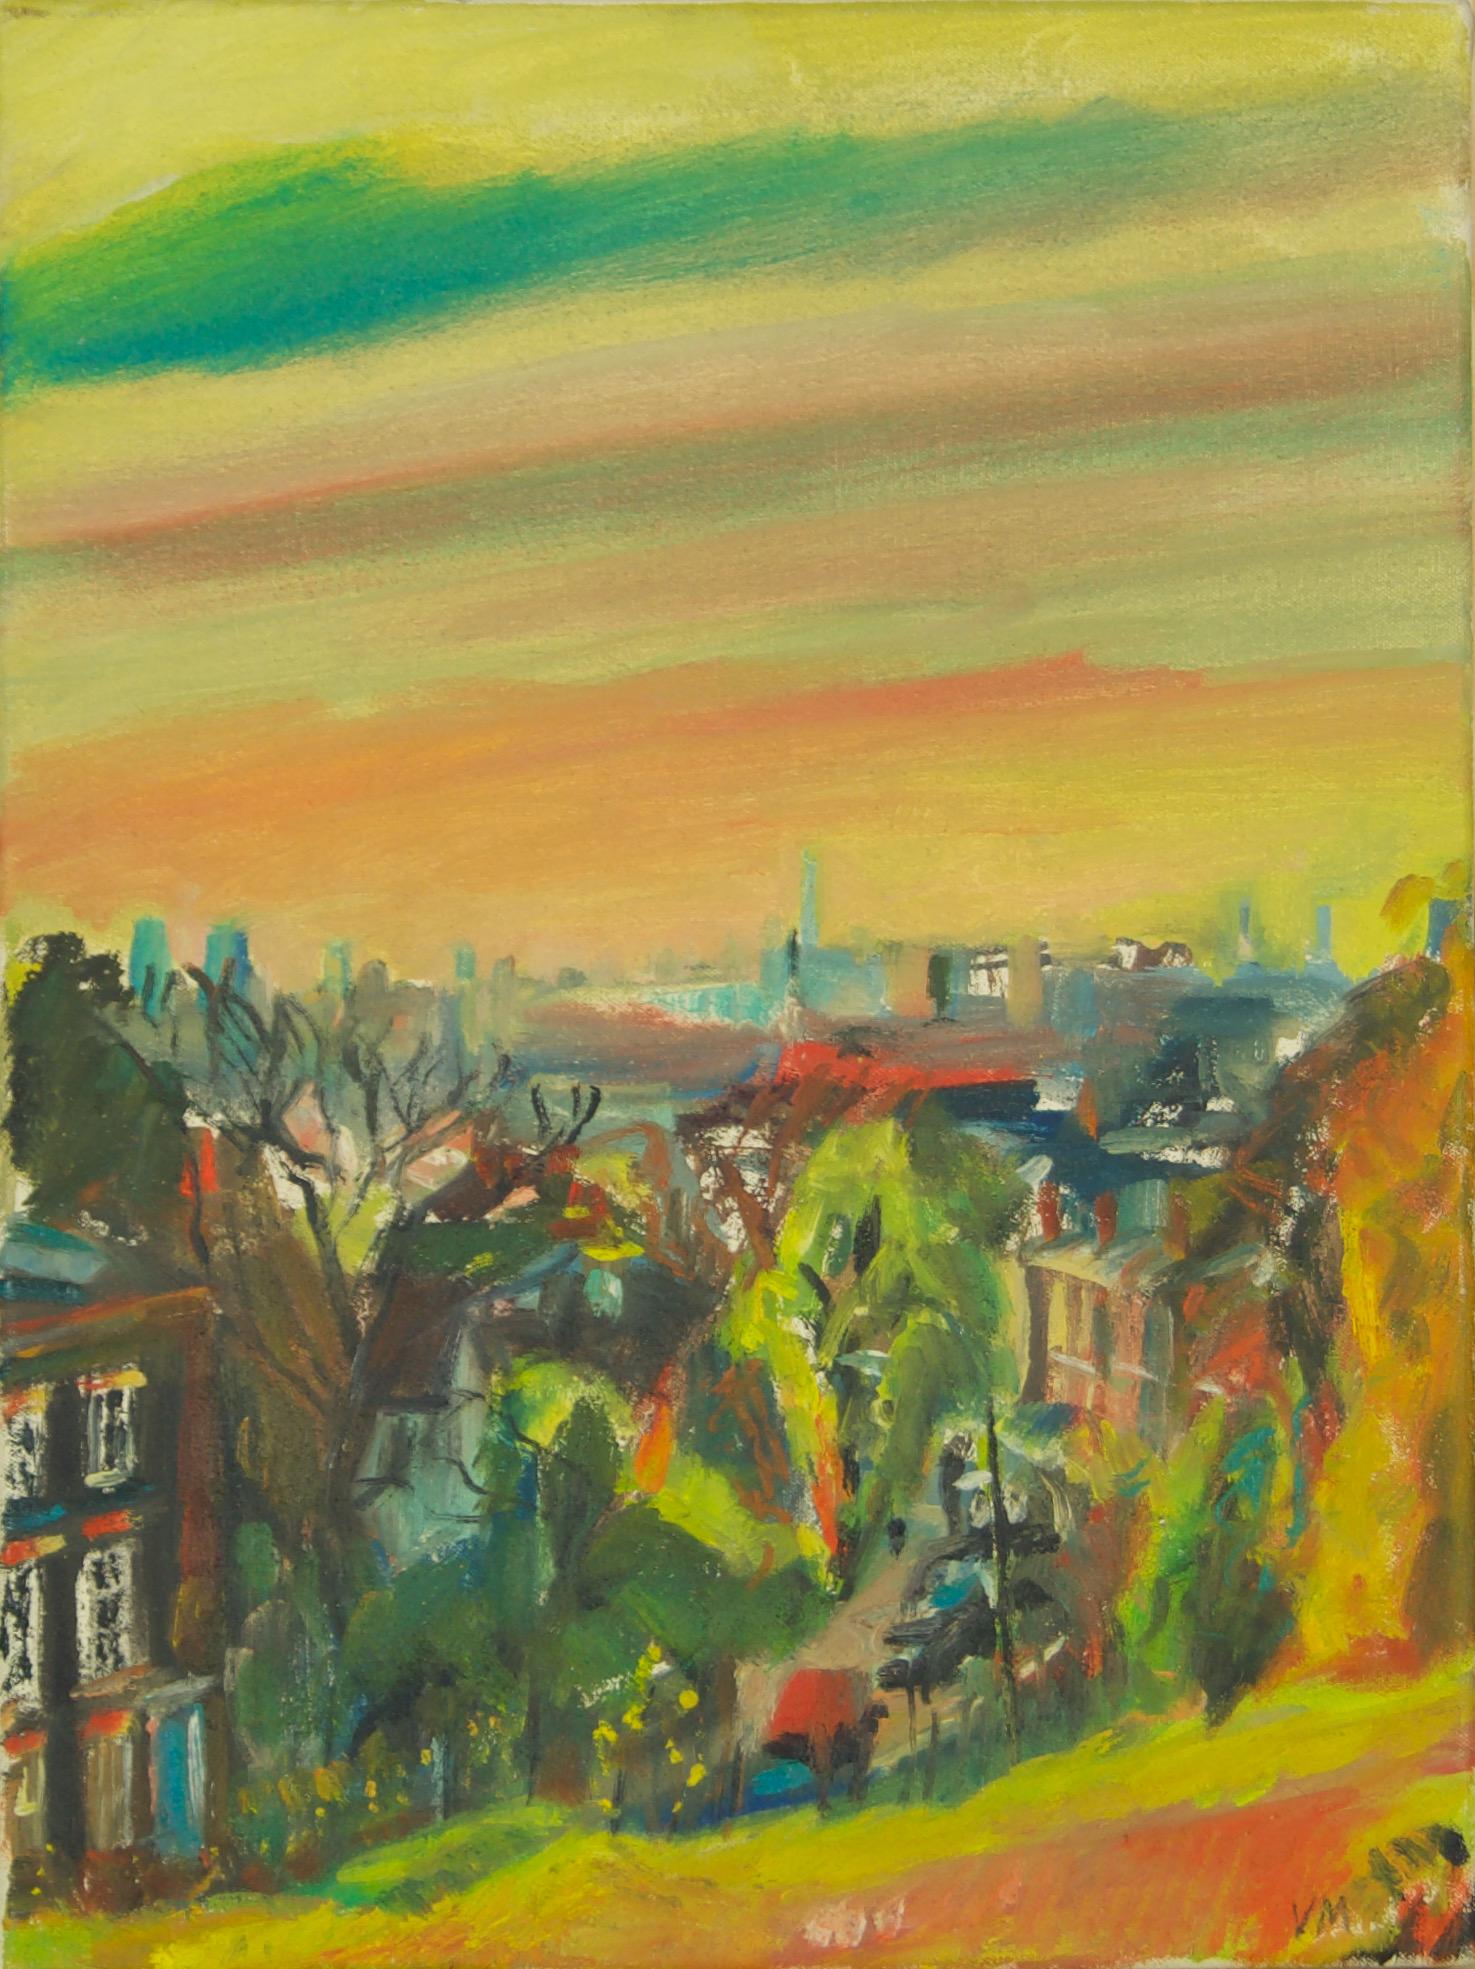 London Suburb - Late 20th Century Landscape Oil in London by Milne